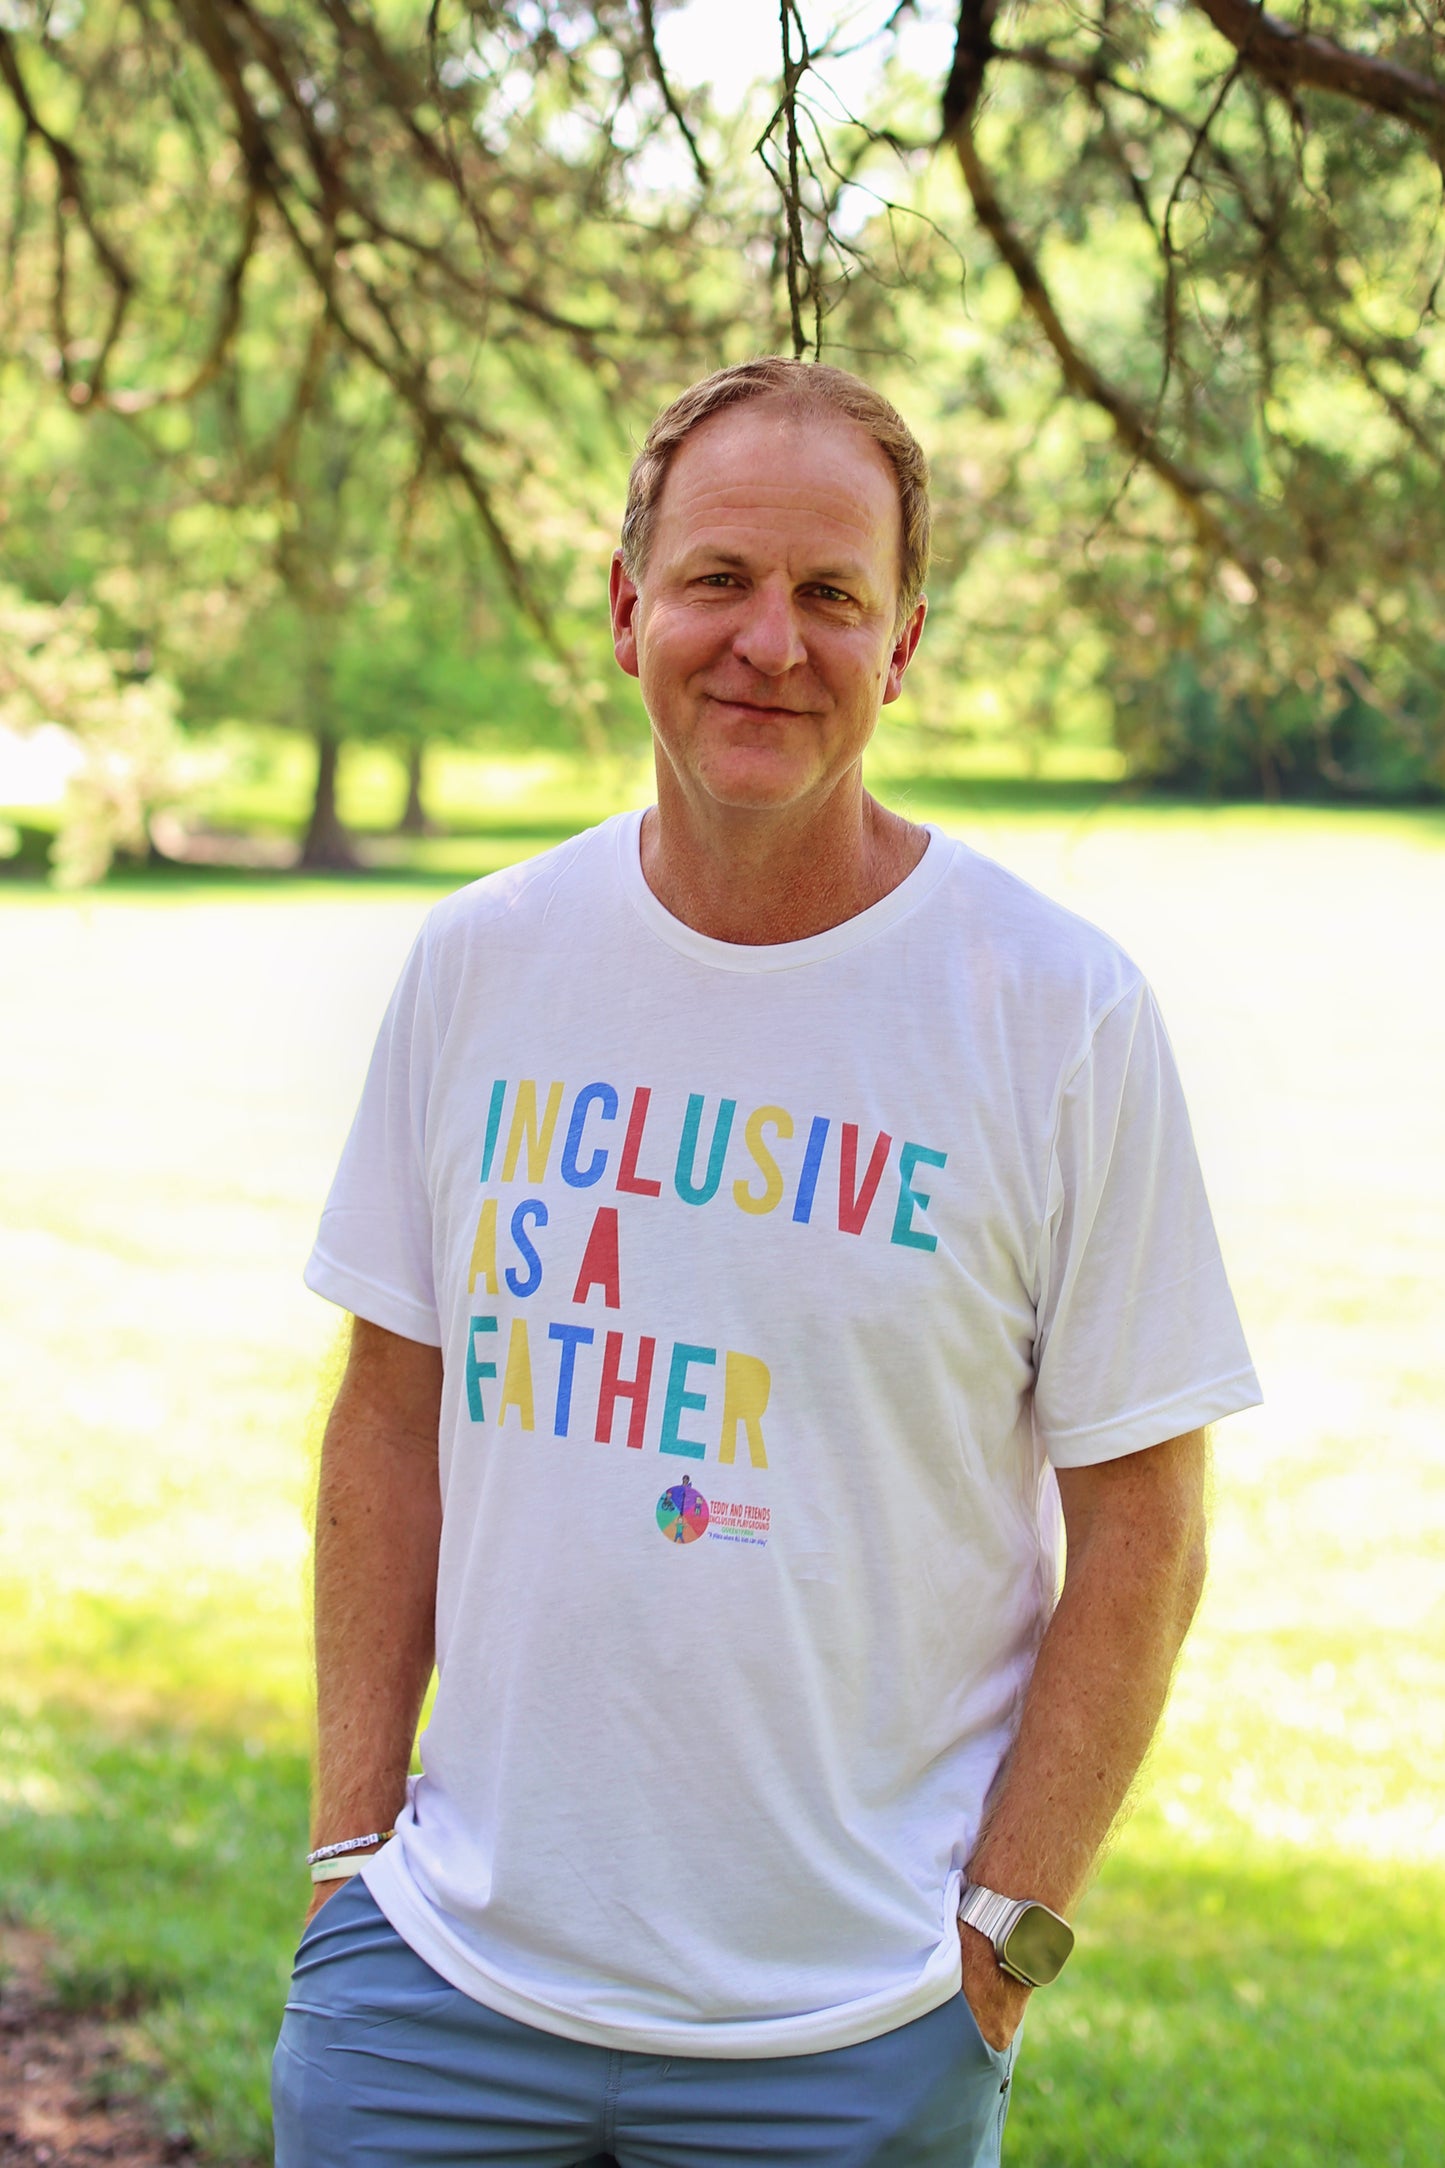 Inclusive As A Father Tee